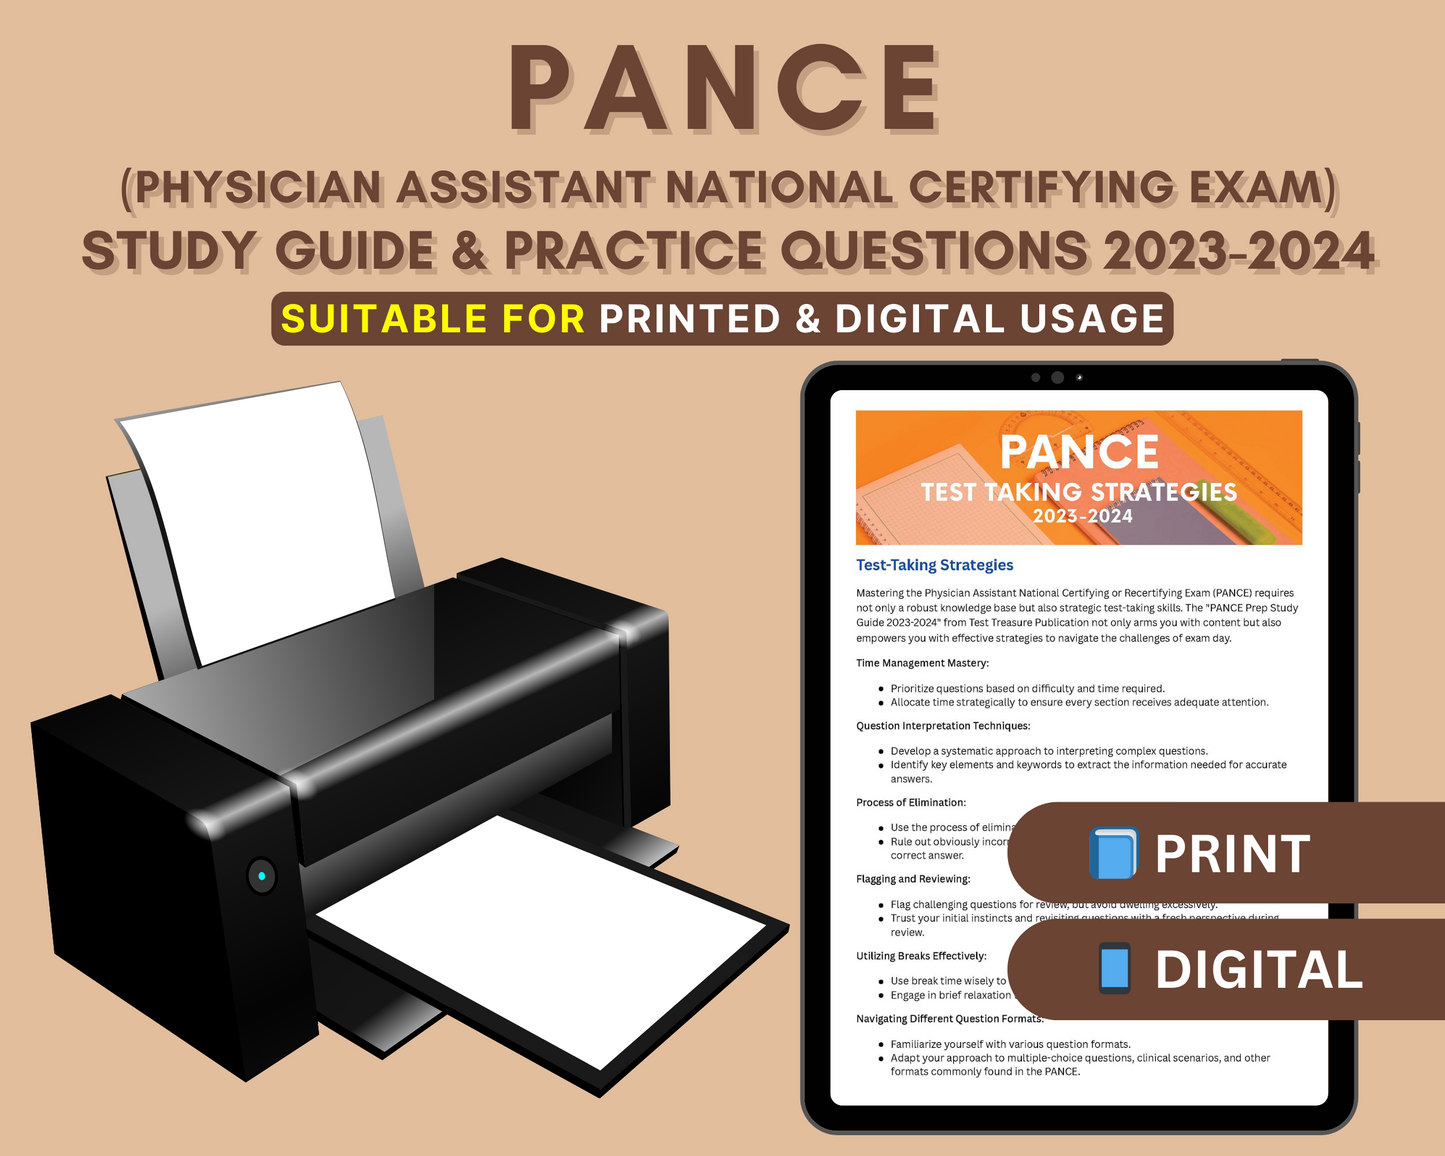 PANCE Prep Study Guide 2023-24: In-Depth Content Review, Practice Test & Exam Tips for Physician Assistant Certification